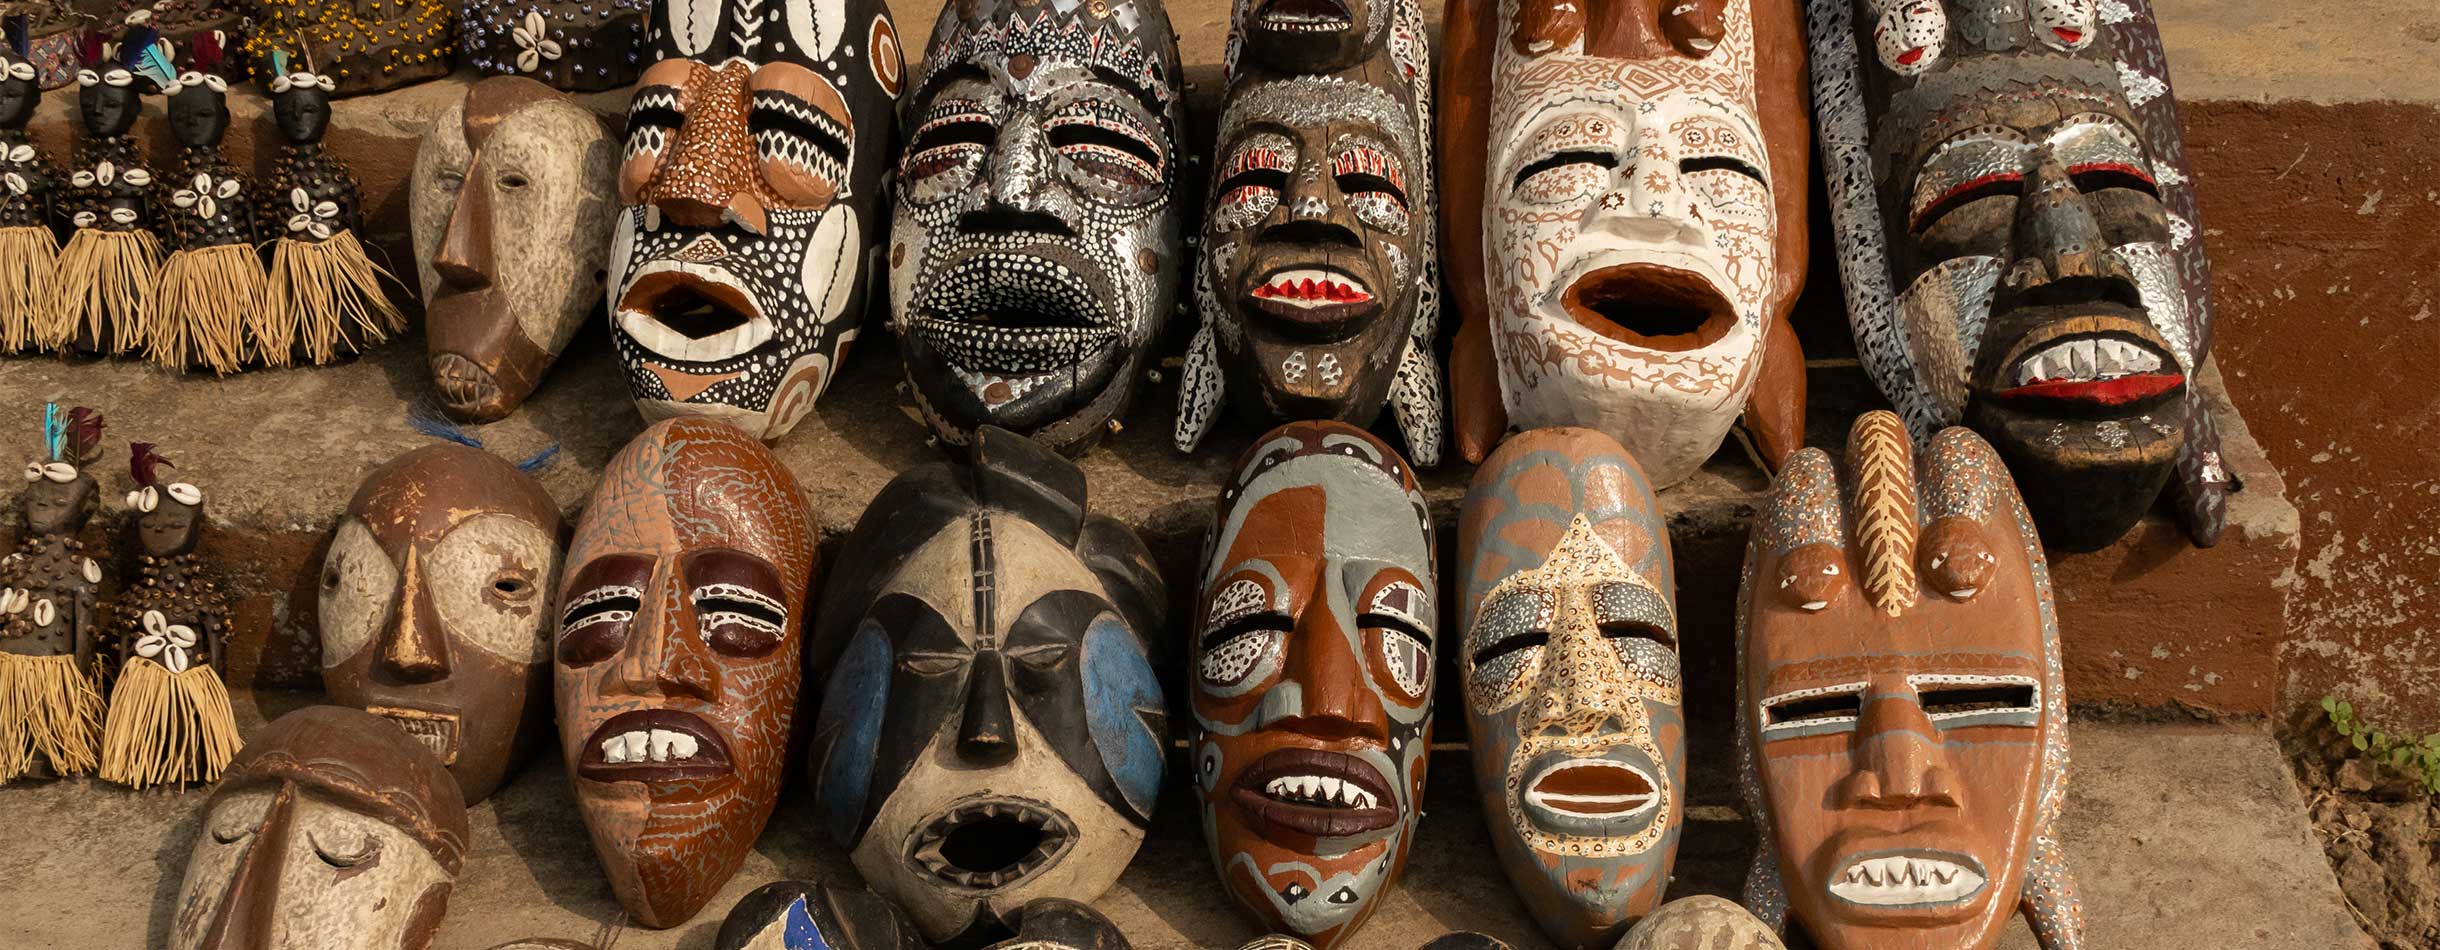 Colourful African masks on a market stall, Benin, Africa 